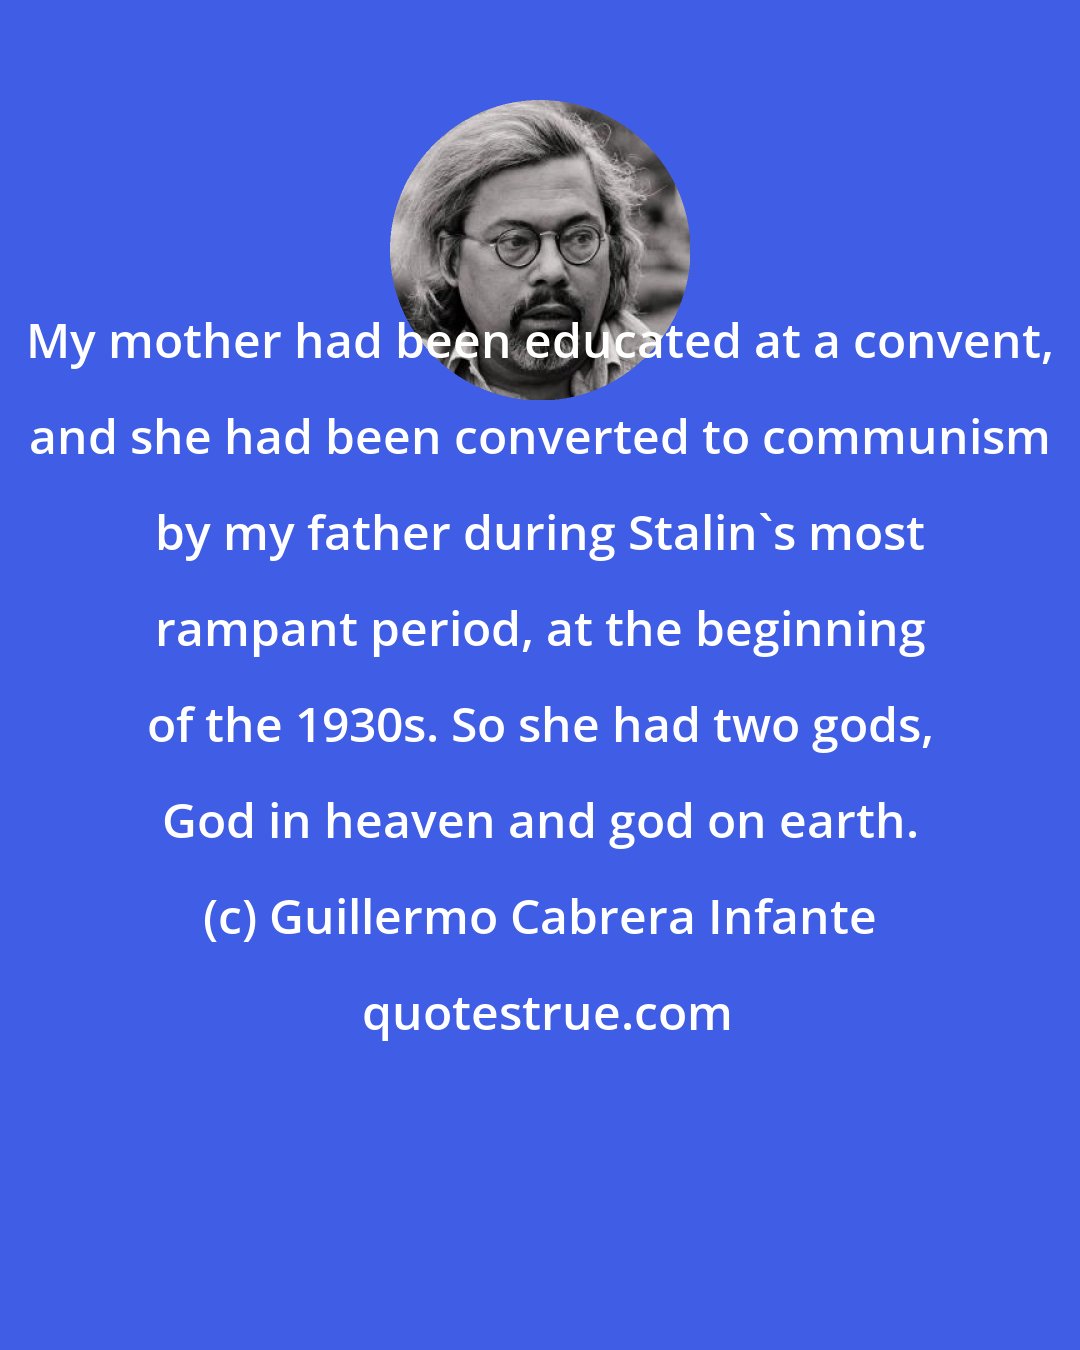 Guillermo Cabrera Infante: My mother had been educated at a convent, and she had been converted to communism by my father during Stalin's most rampant period, at the beginning of the 1930s. So she had two gods, God in heaven and god on earth.